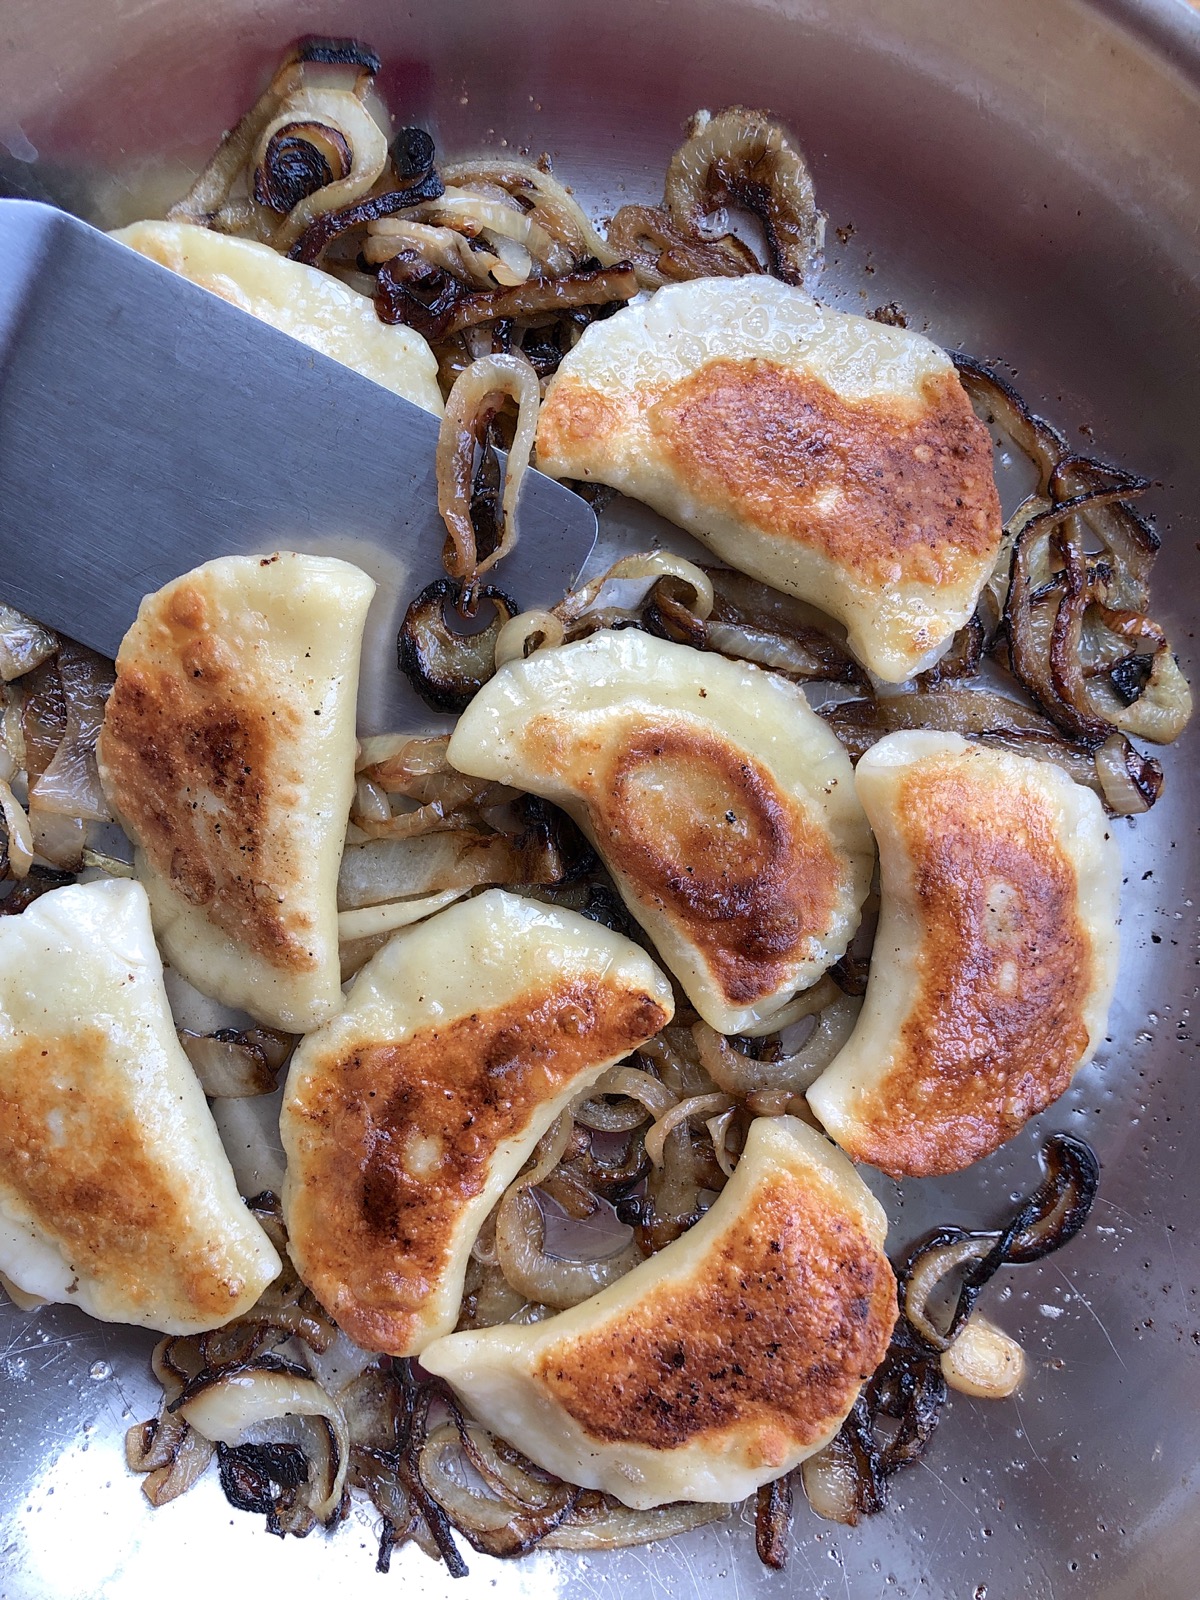 Browned pierogi cooking in a sauté pan surrounded by caramelized onions.